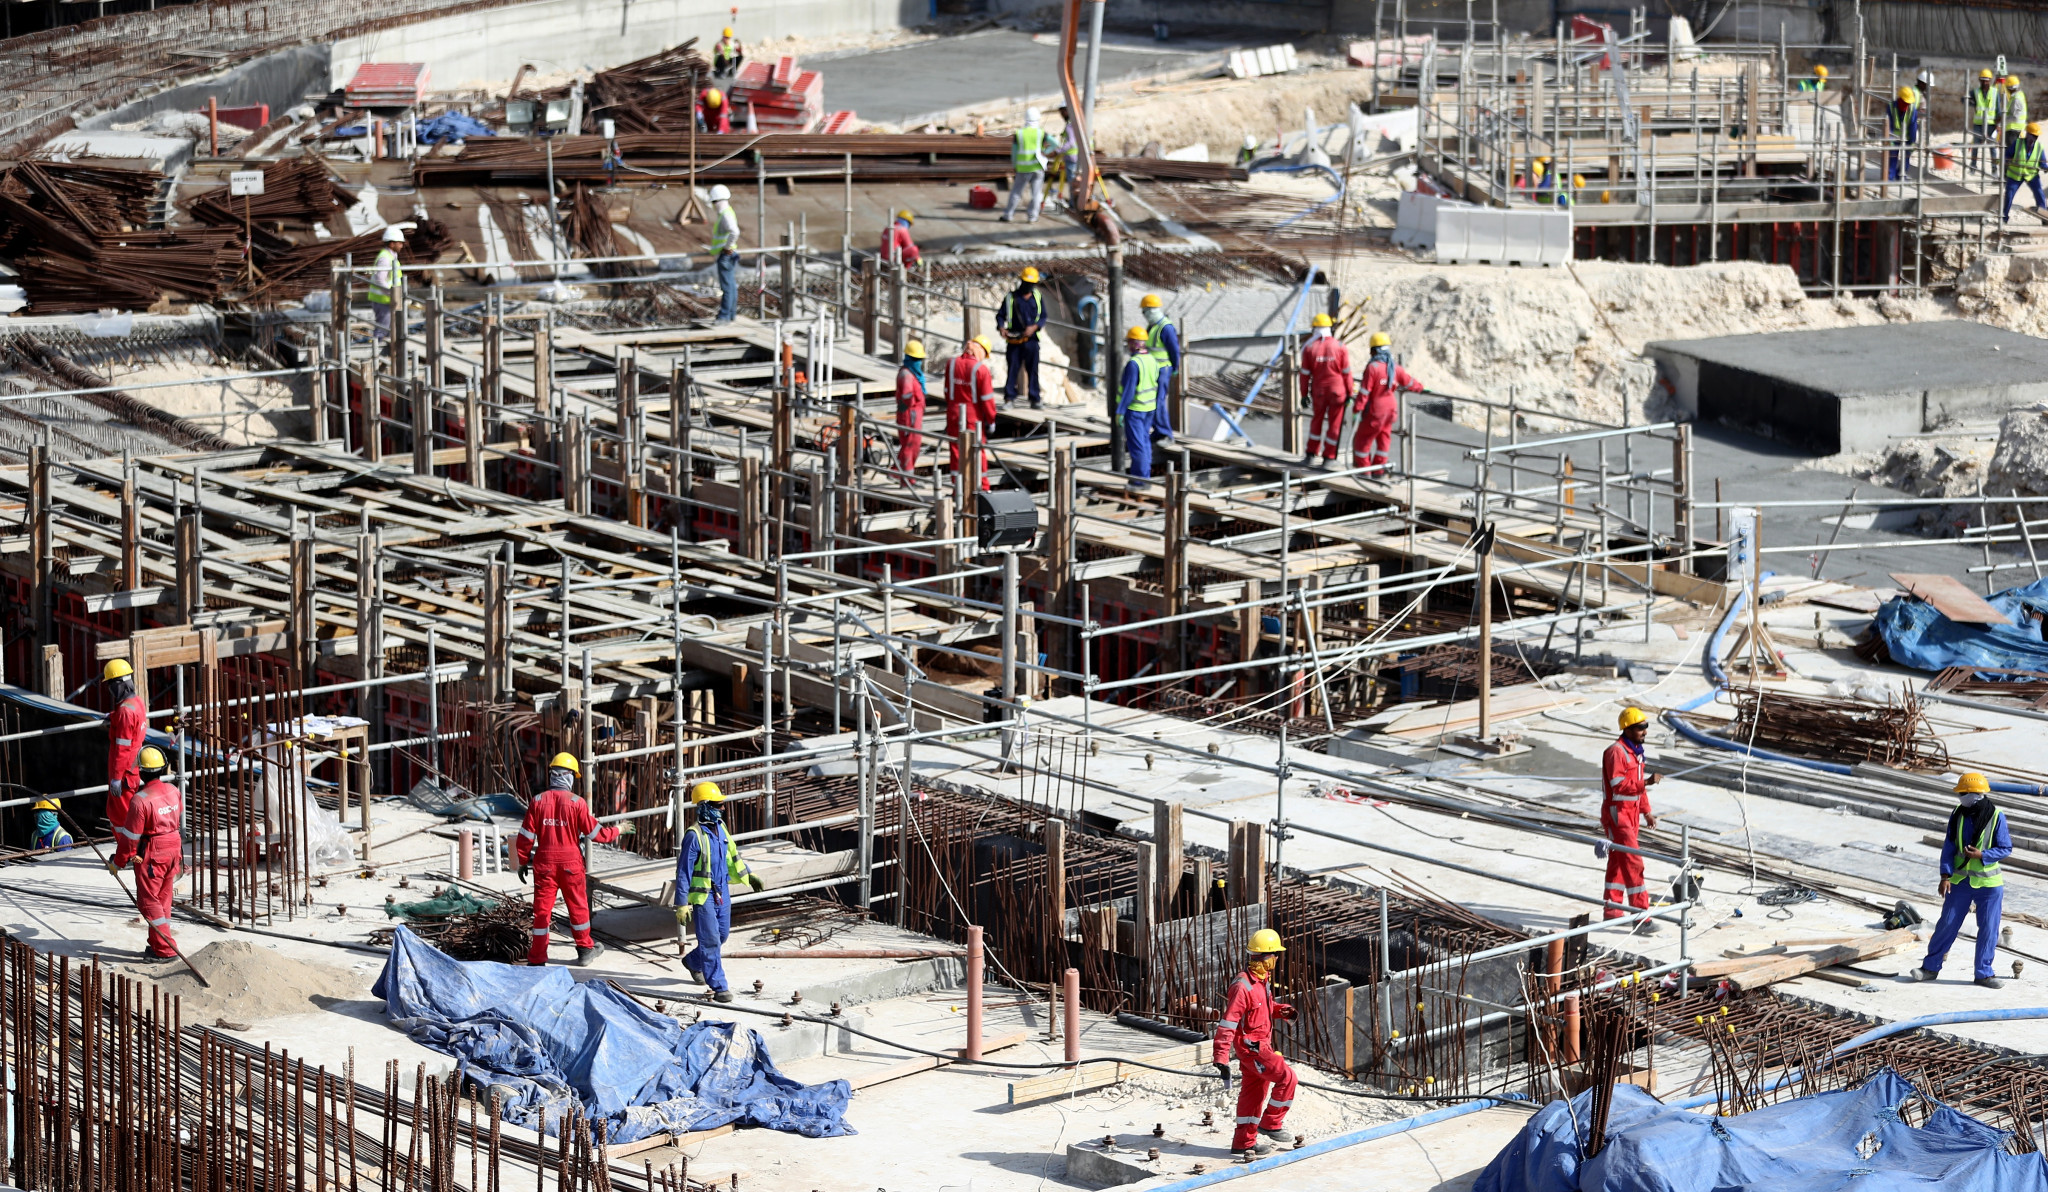 Workers seen during a tour at the construction site of the Al Bayt Stadium and the workers accommodation in January in Doha, Qatar. Al Bayt Stadium will be a host venue for the 2022 FIFA World Cup, which will have a capacity of 60,000 and host matches through to the semi-finals ©Getty Images